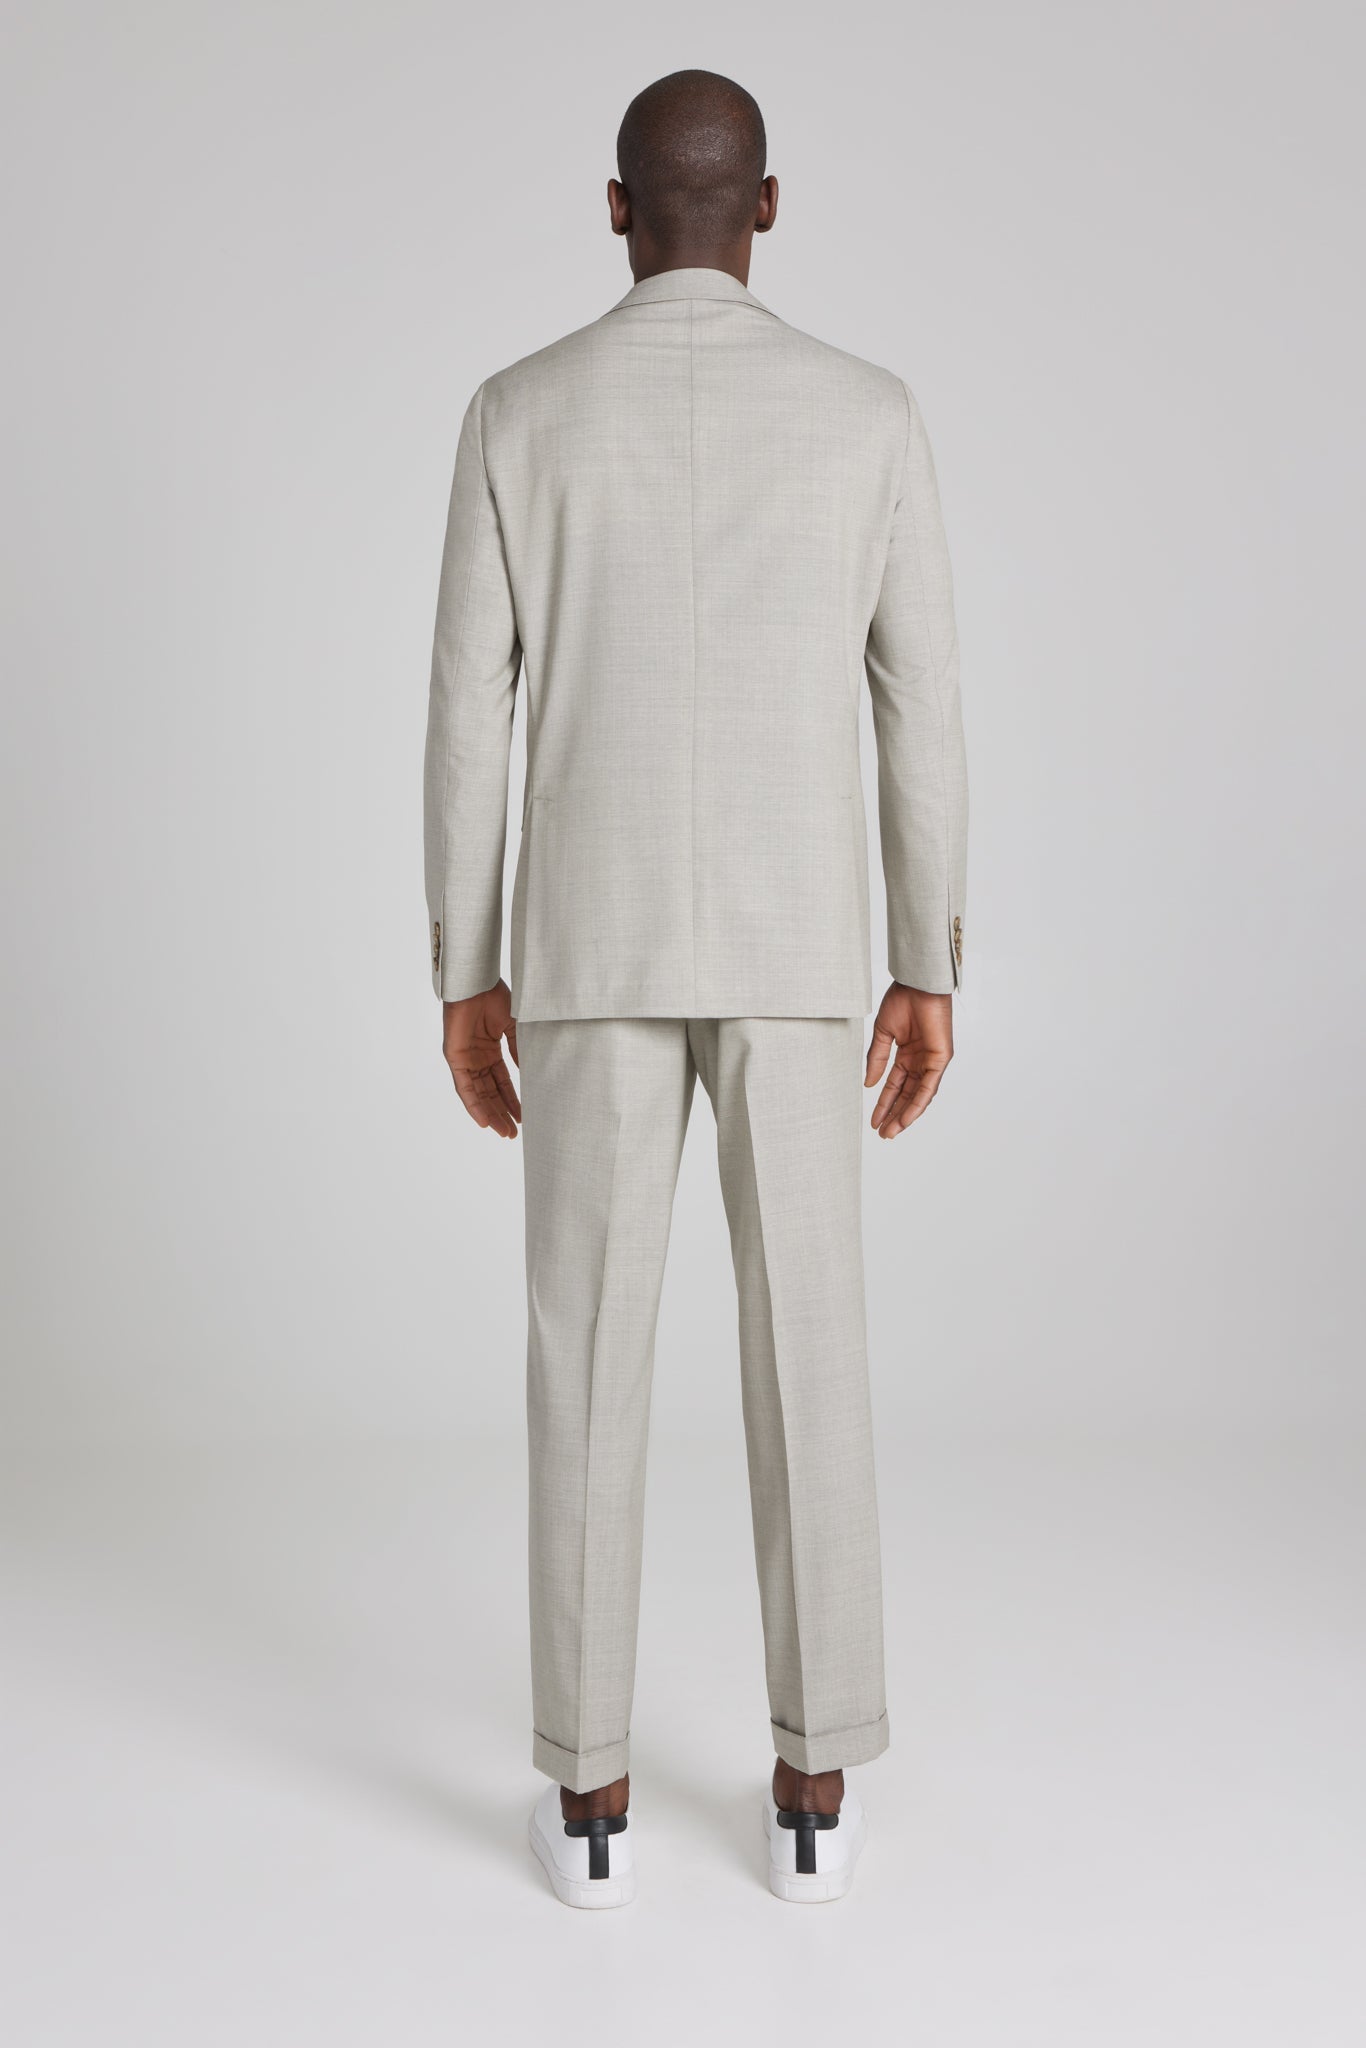 Alt view 3 Midland Solid Wool Suit in Taupe